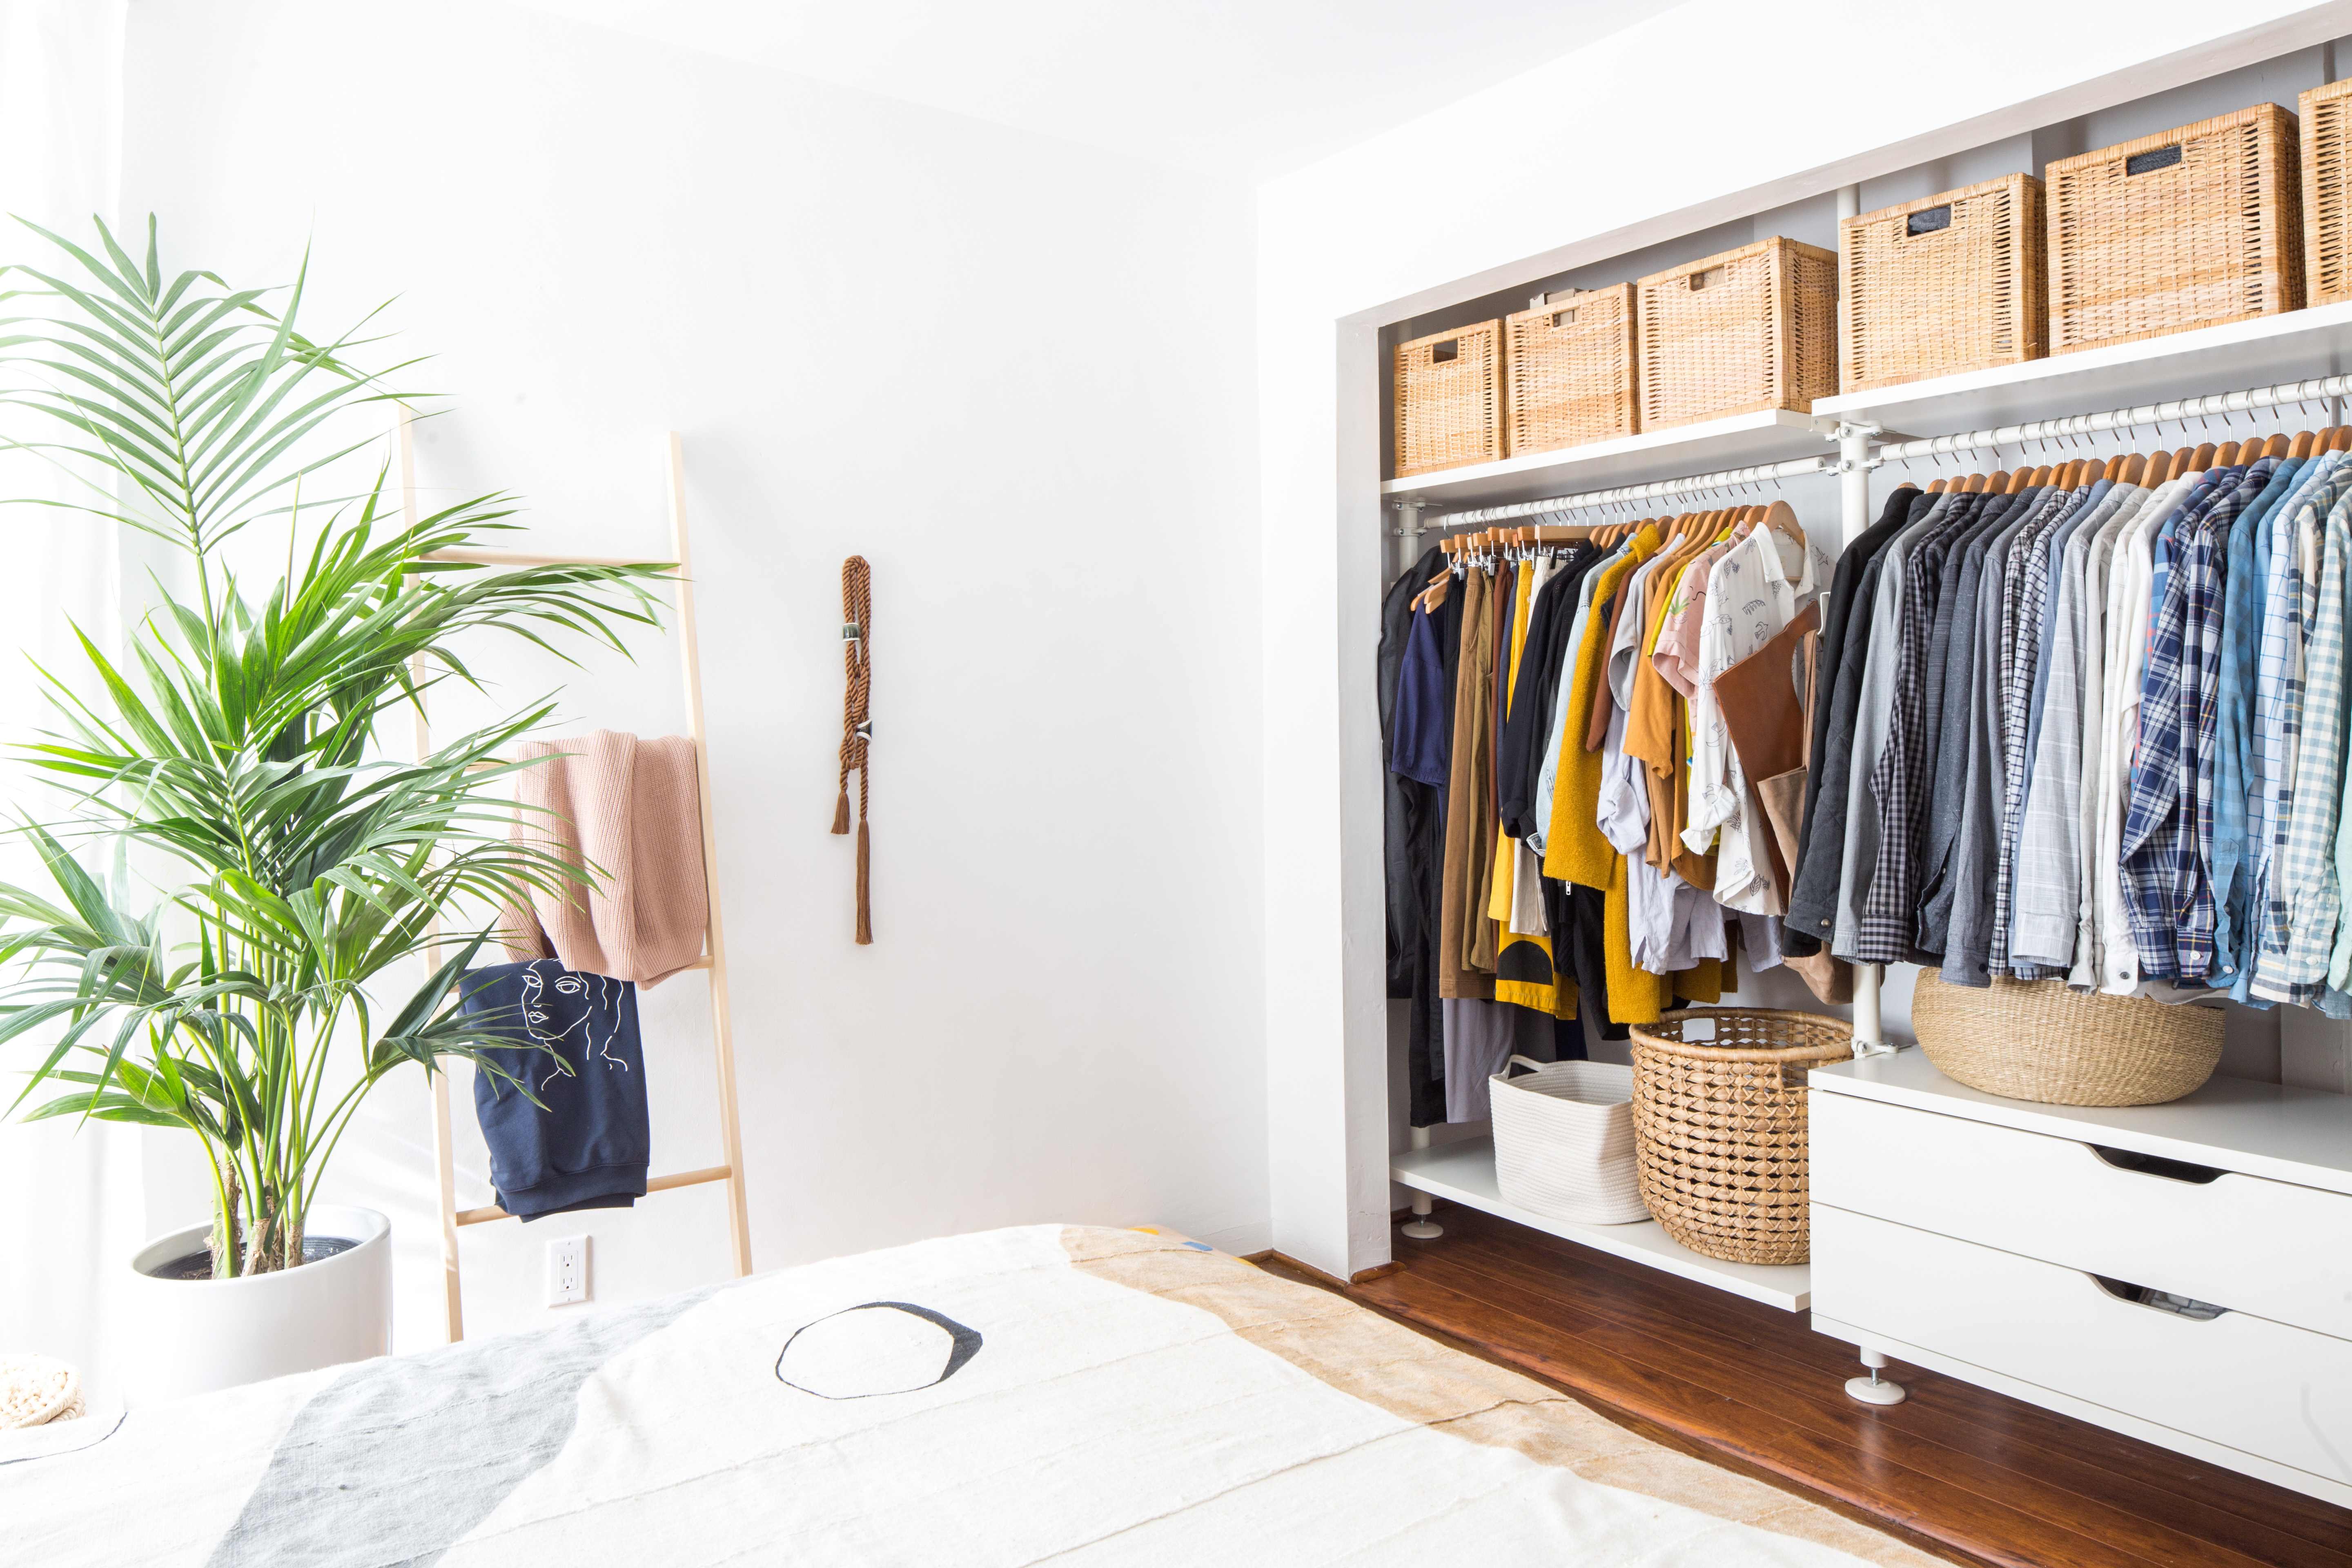 9 Best DIY Closet Systems 2023: The Best Build Your Own Closet Systems